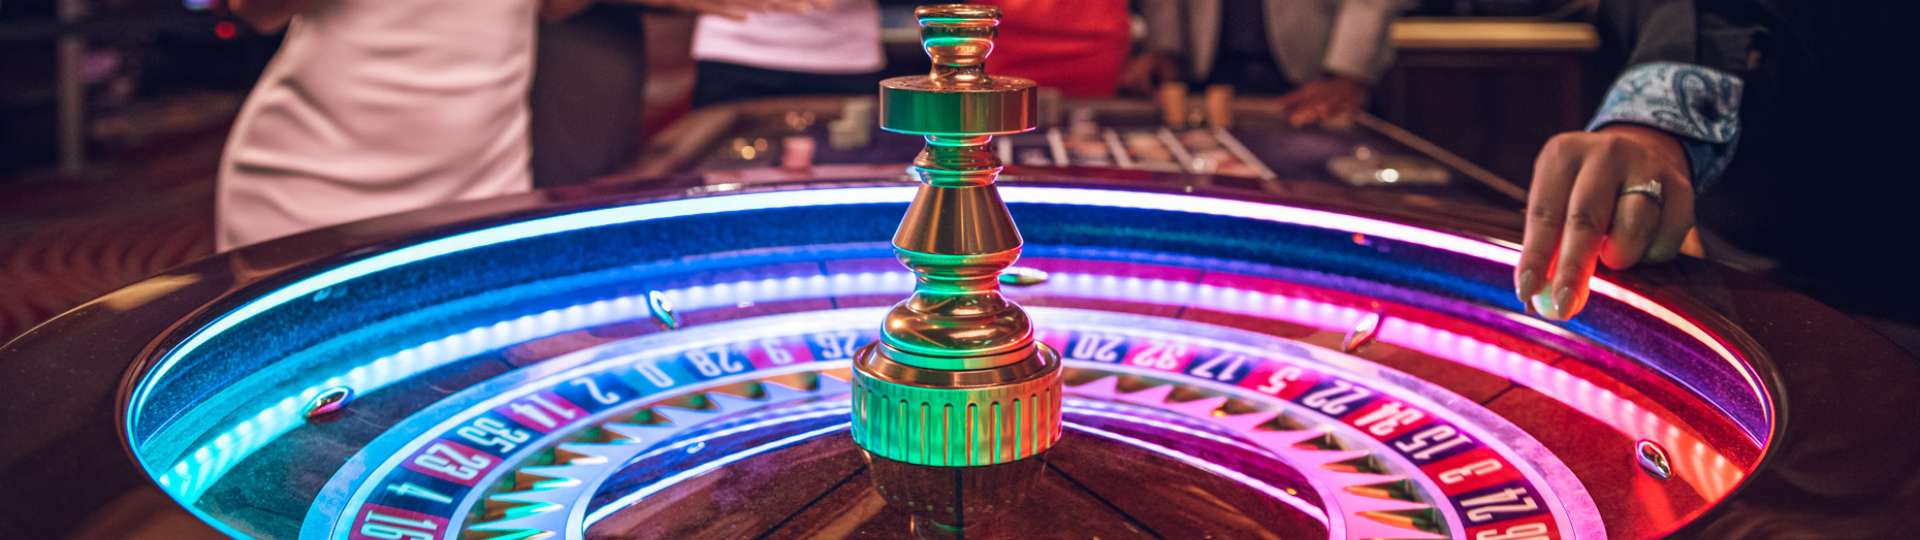 Understanding The Game of Roulette